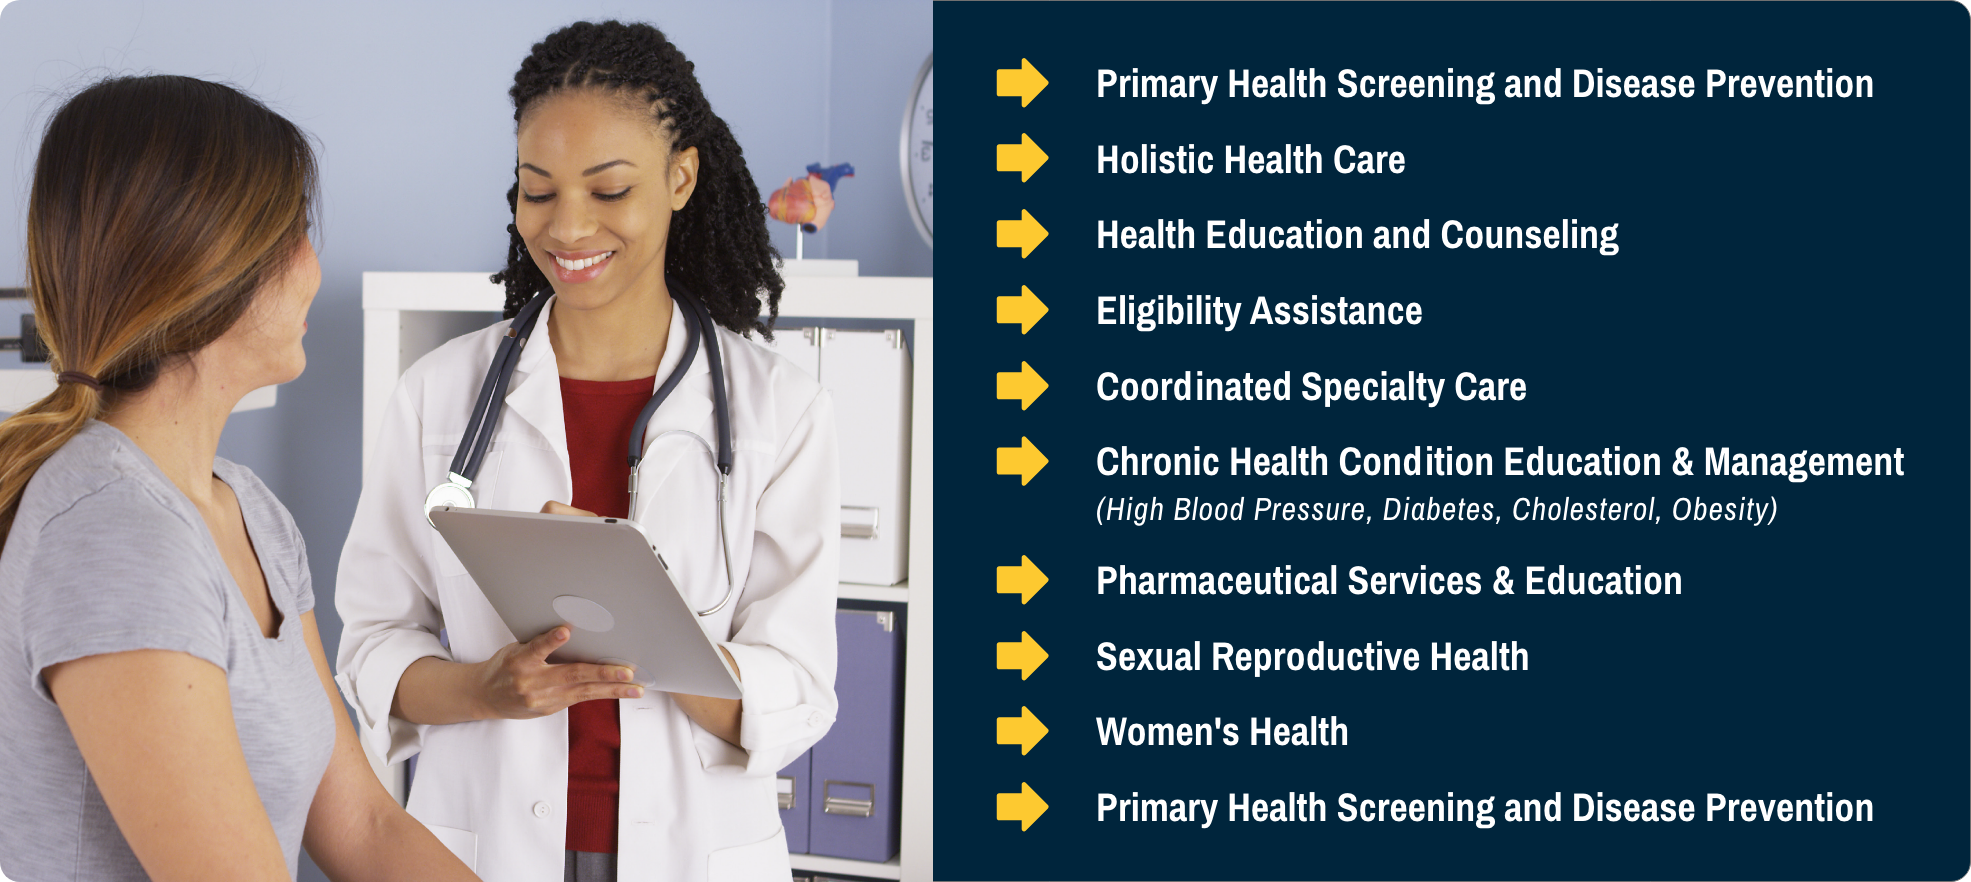 Healthcare provider engaging with patient, accompanied by a list of Primary Care services provided by The Harris Center for Mental Health and IDD